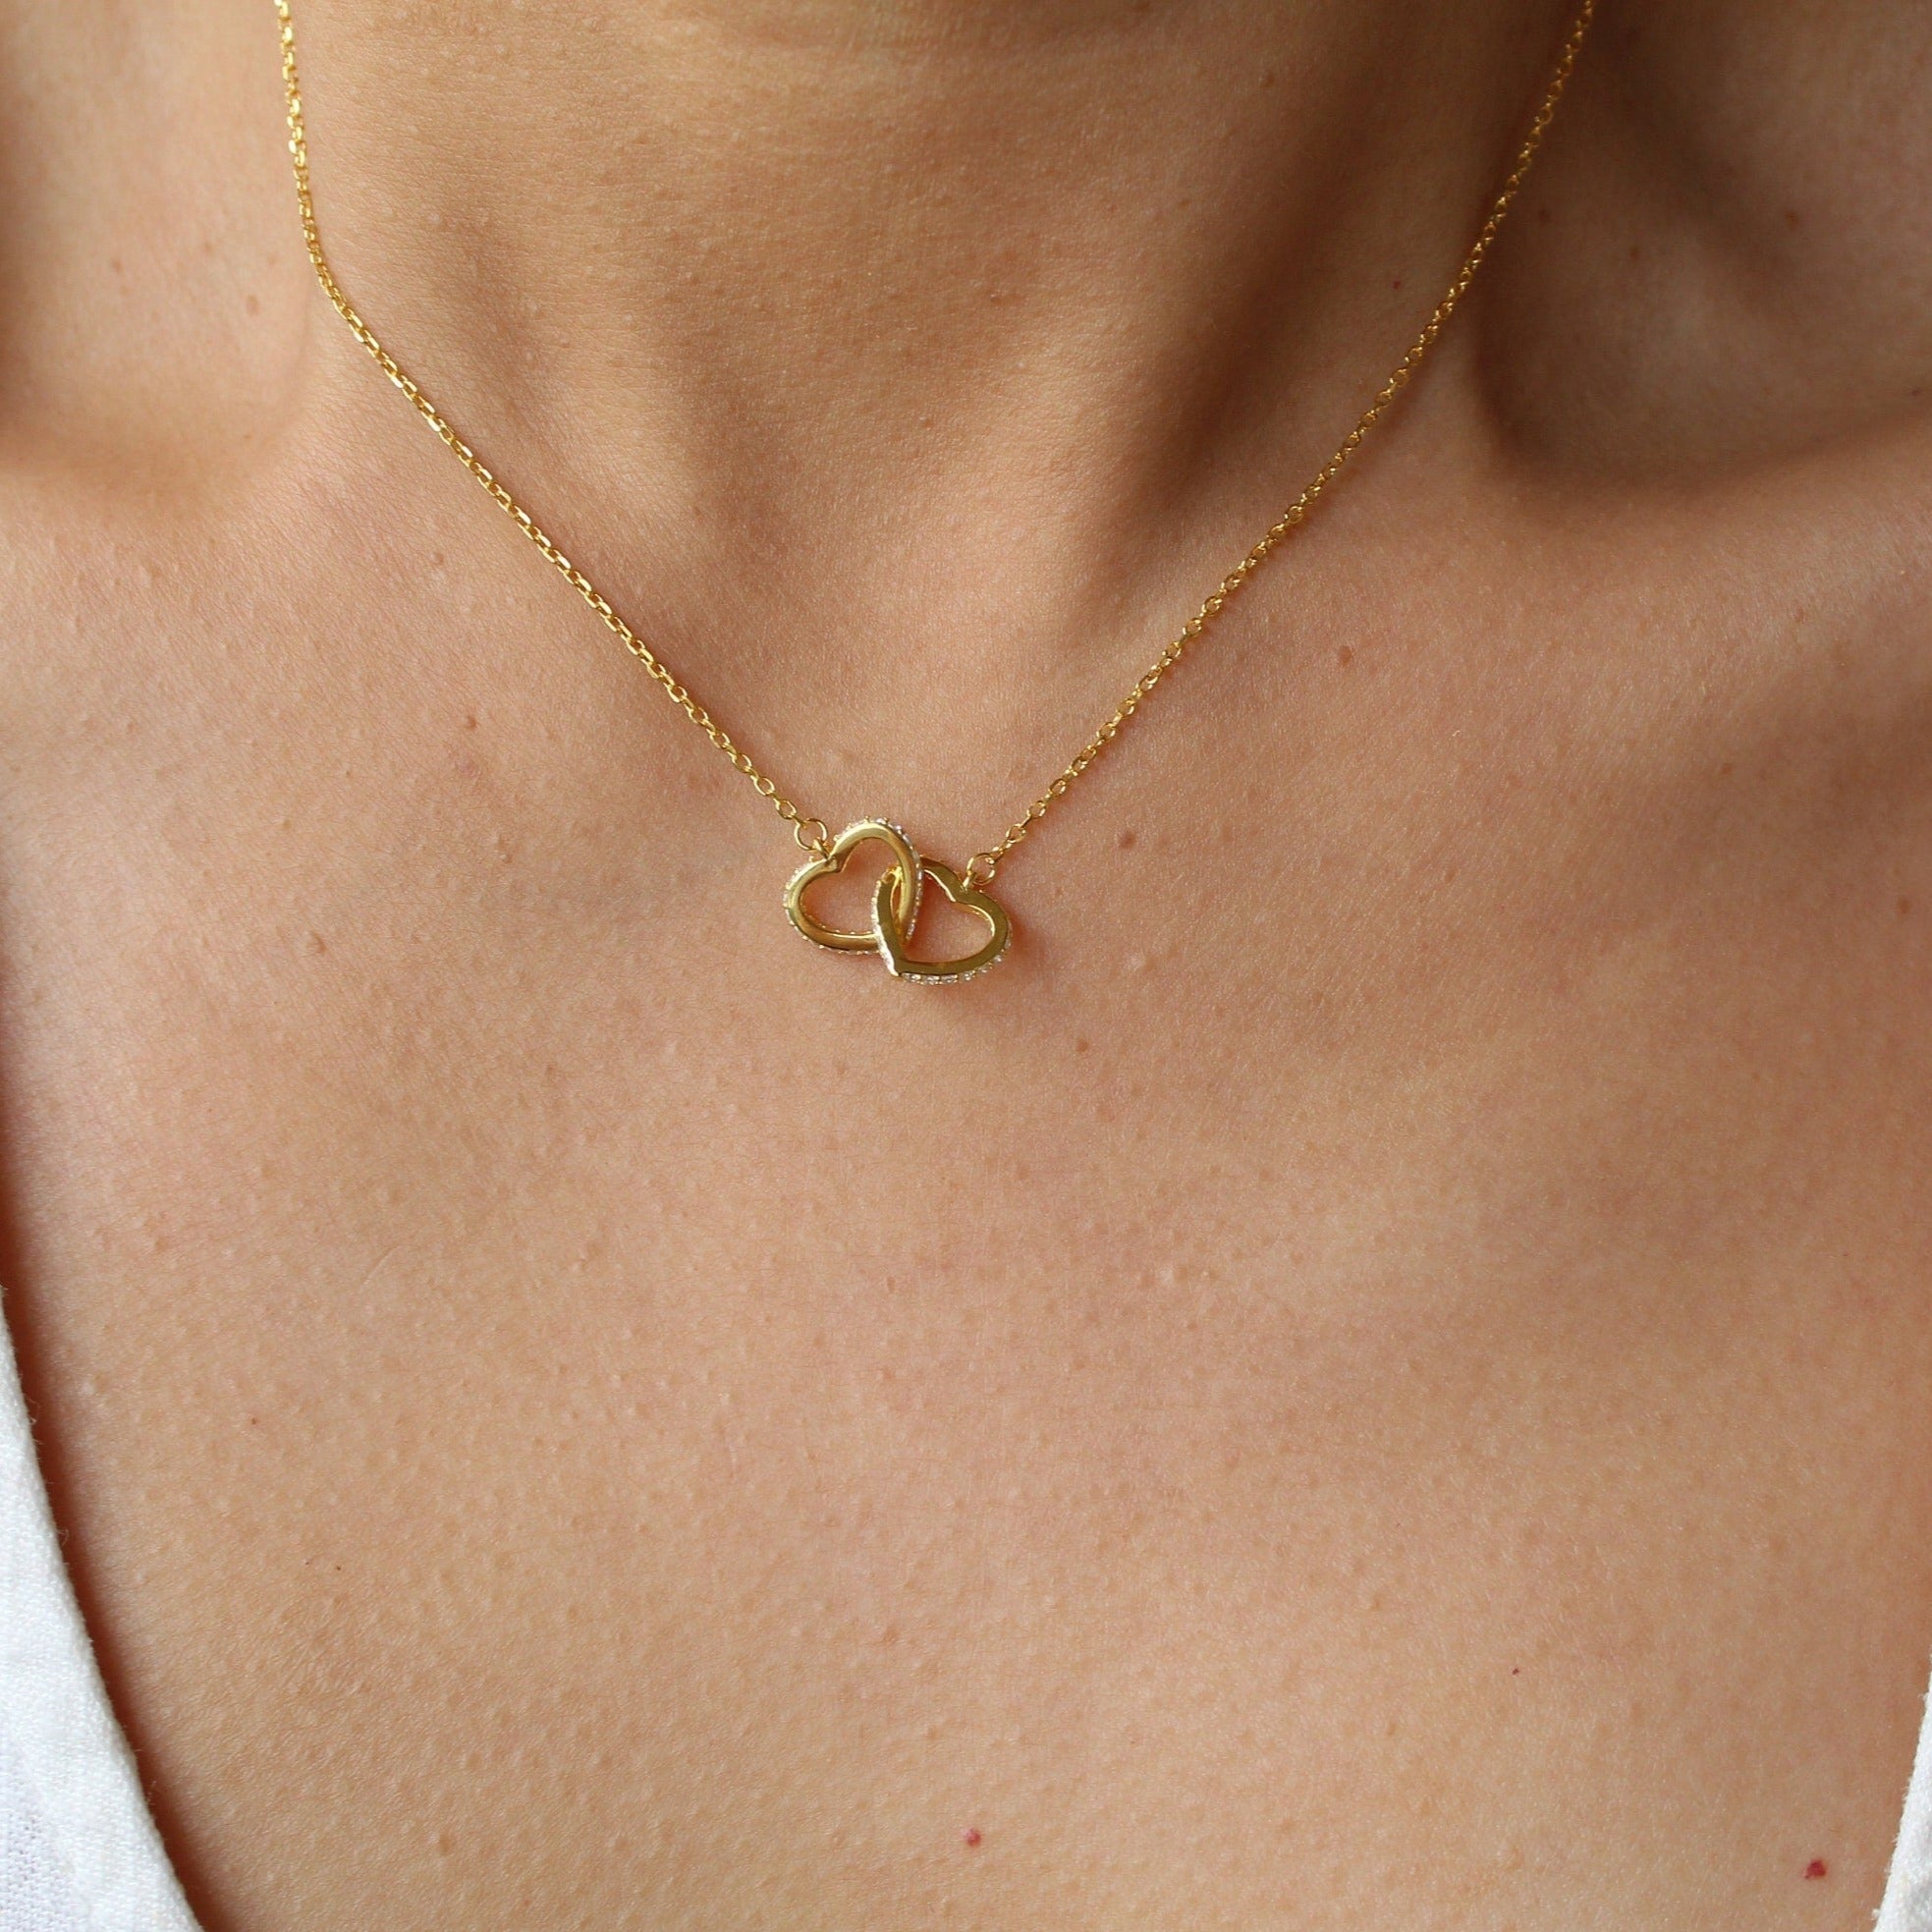 Dainty Interlocking Hearts Necklace Tiny 18k Gold Heart Pendant Necklaces for Women Dainty Gold Necklace Gifts for Her